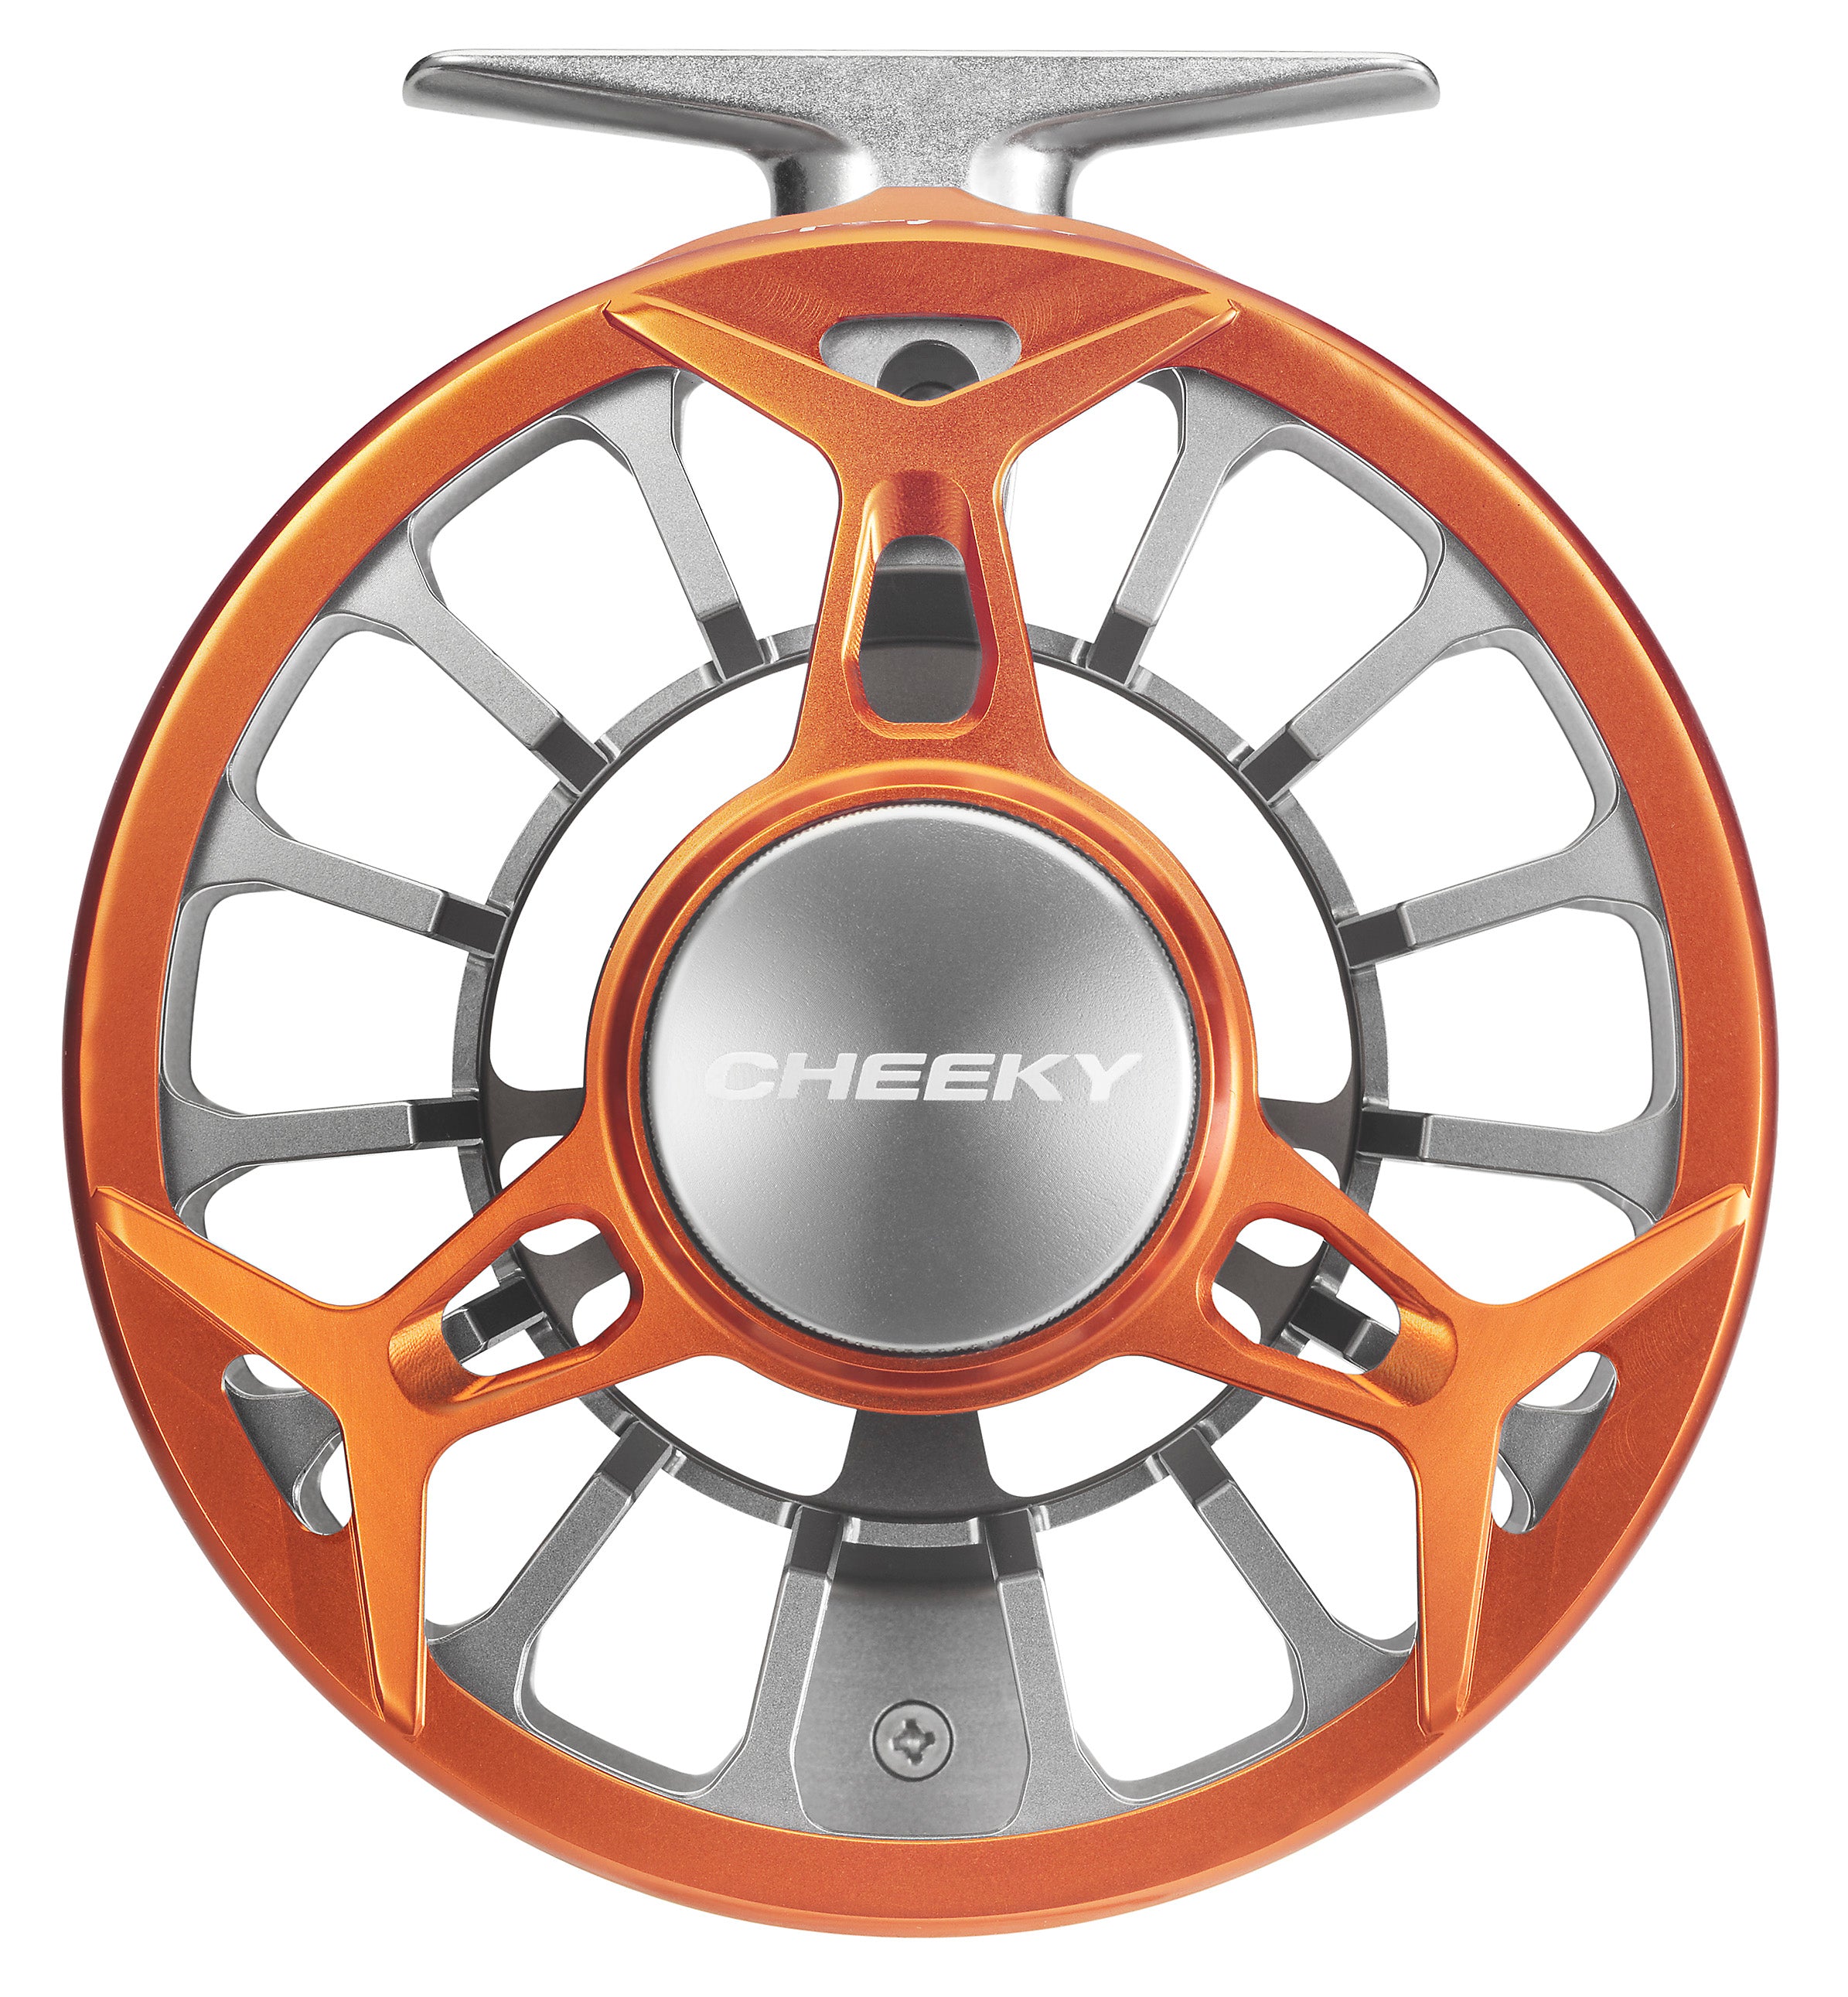 How to Remove the Spool from the Cheeky Launch 350 Fly Reel (2020